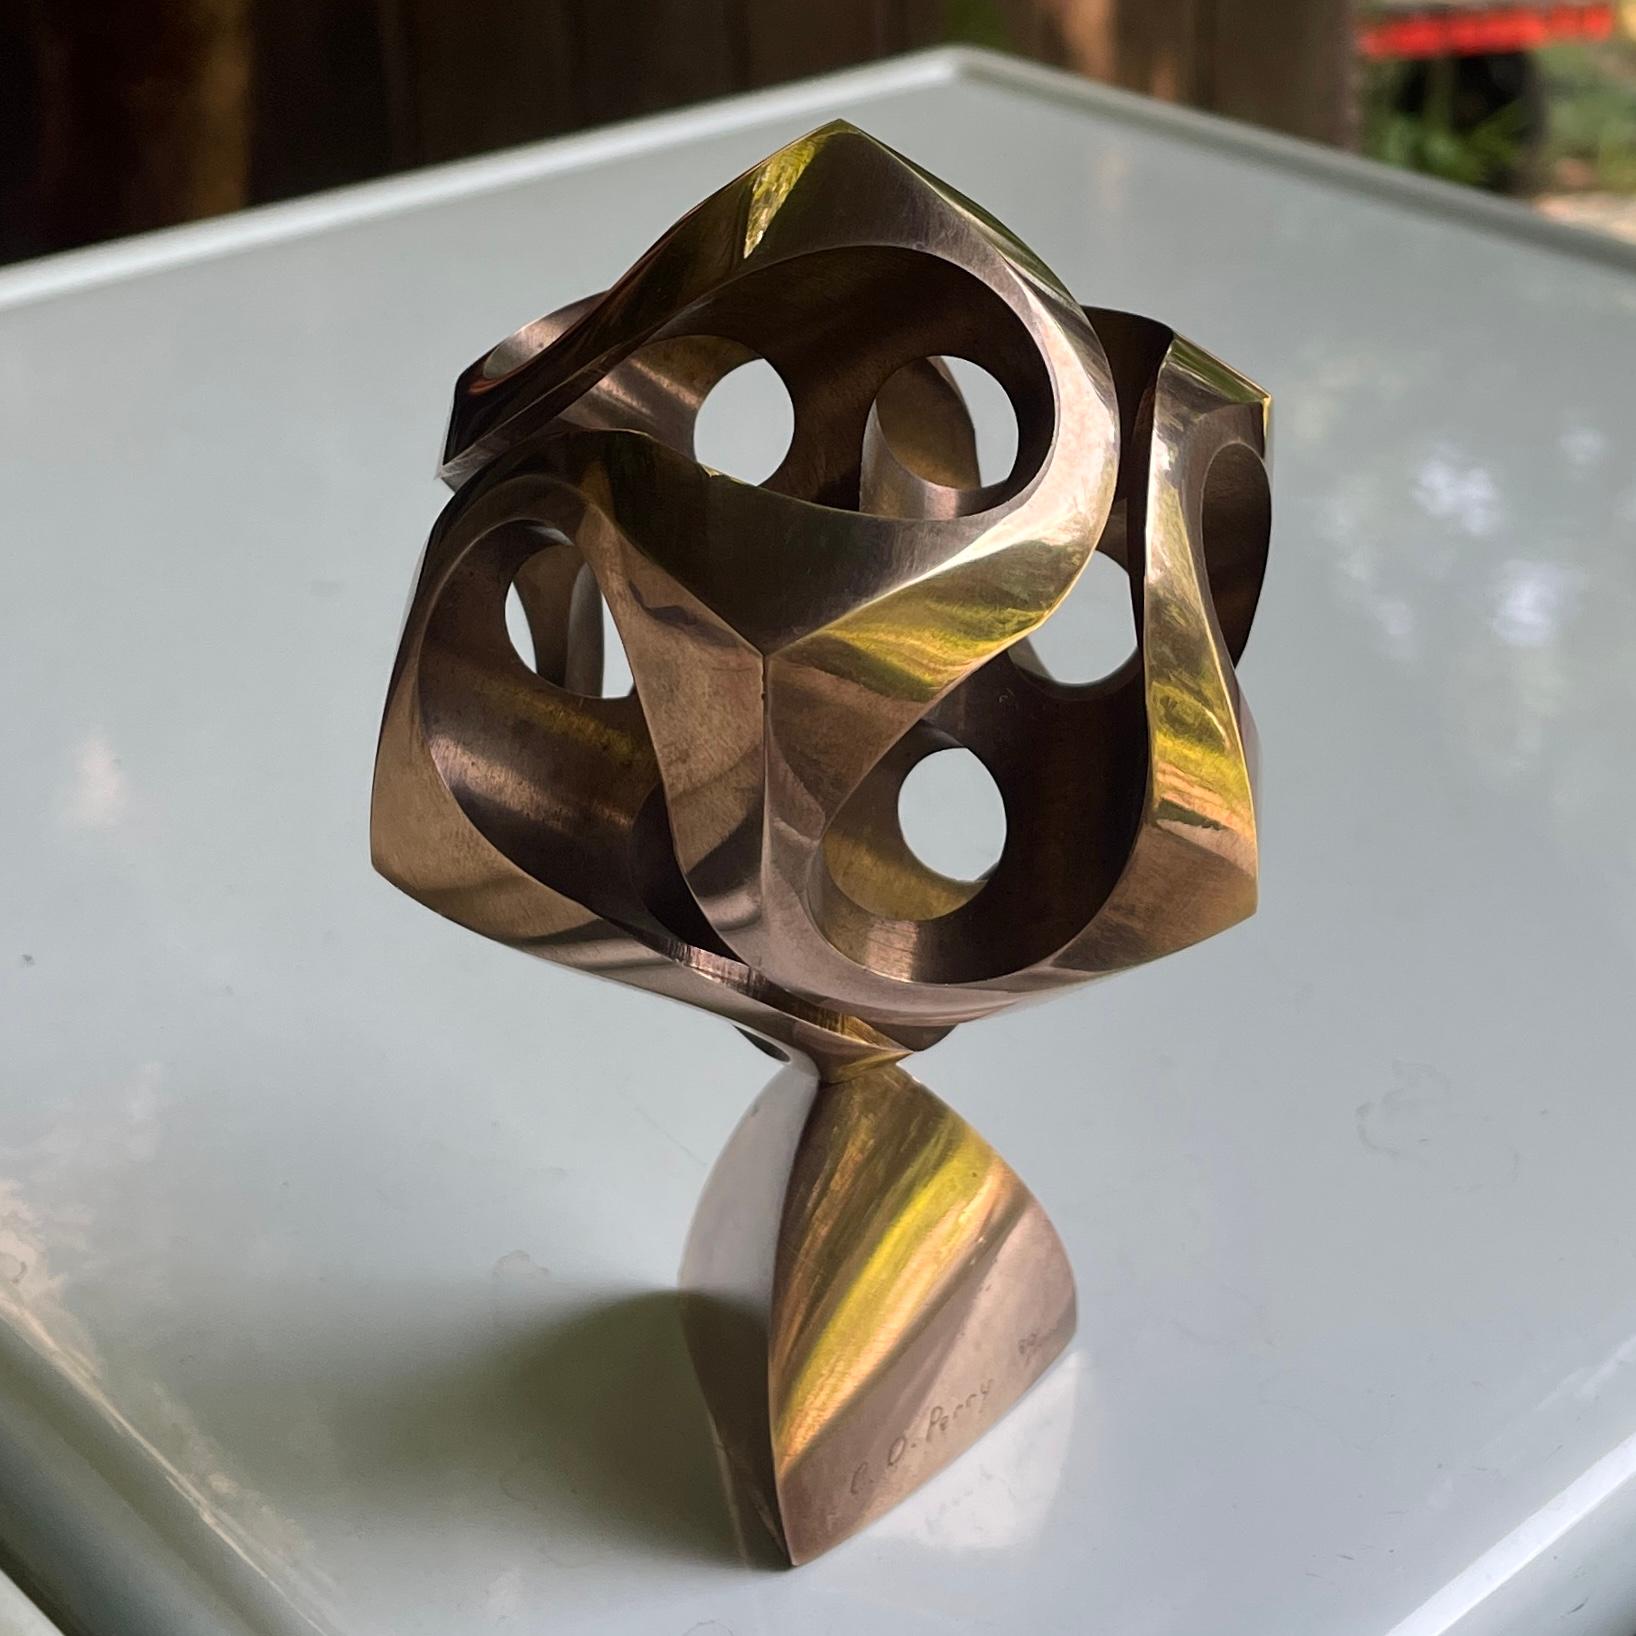 Rare and Early MOMA/MIT Mathematical Statuette, 80/1000. Solid Bronze Swiveling Sphere on Bronze Base. Signed, Numbered.

Dia: 3.5 x H: 5.25 in.